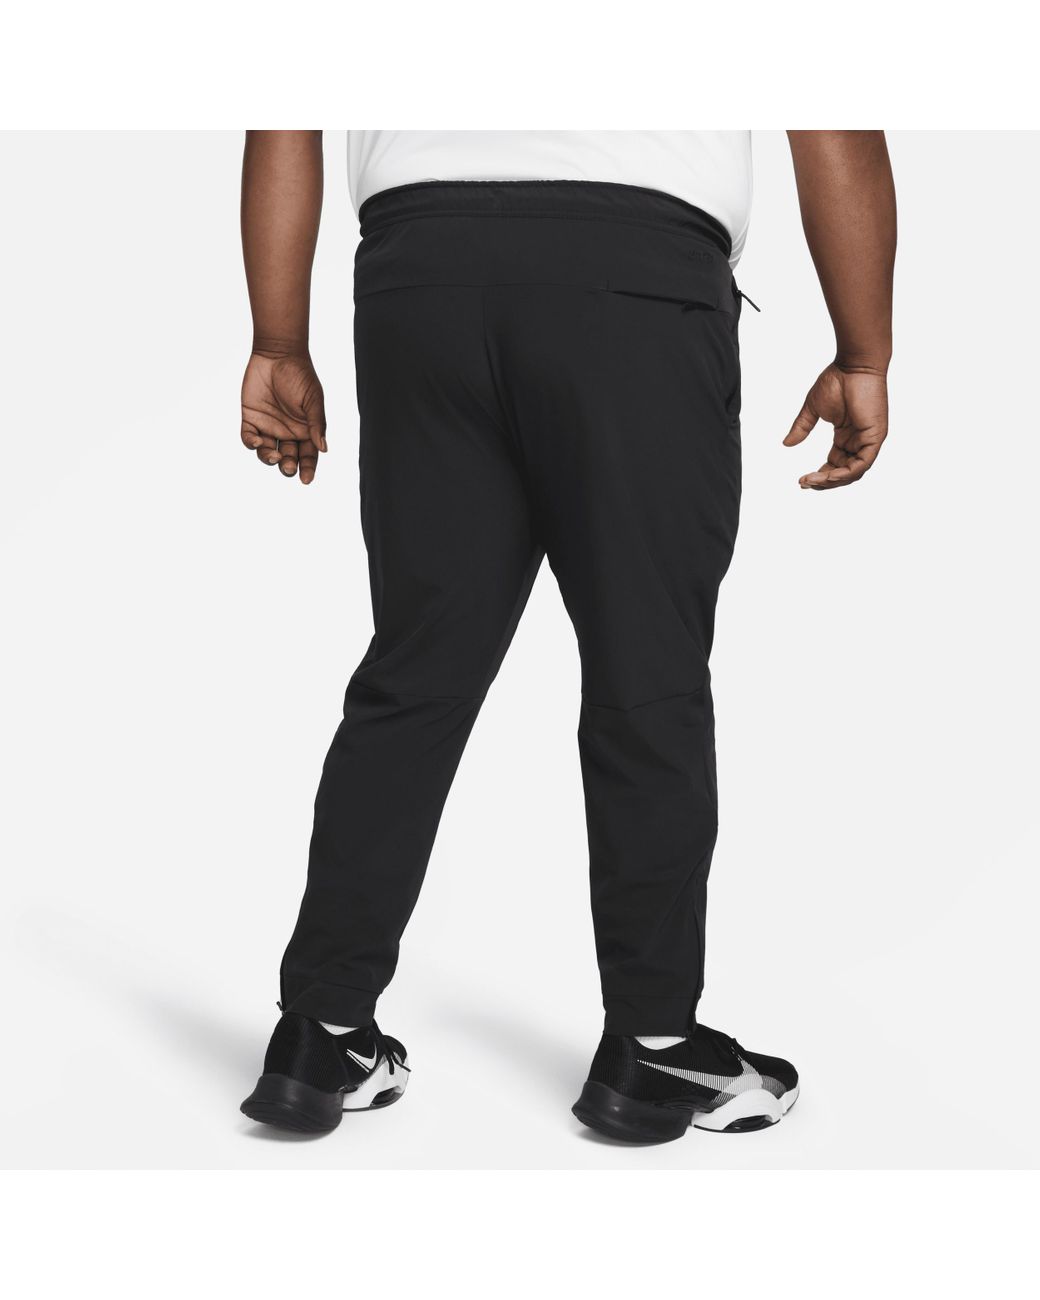 Nike Unlimited Dri-fit Zippered Cuff Versatile Pants in Black for